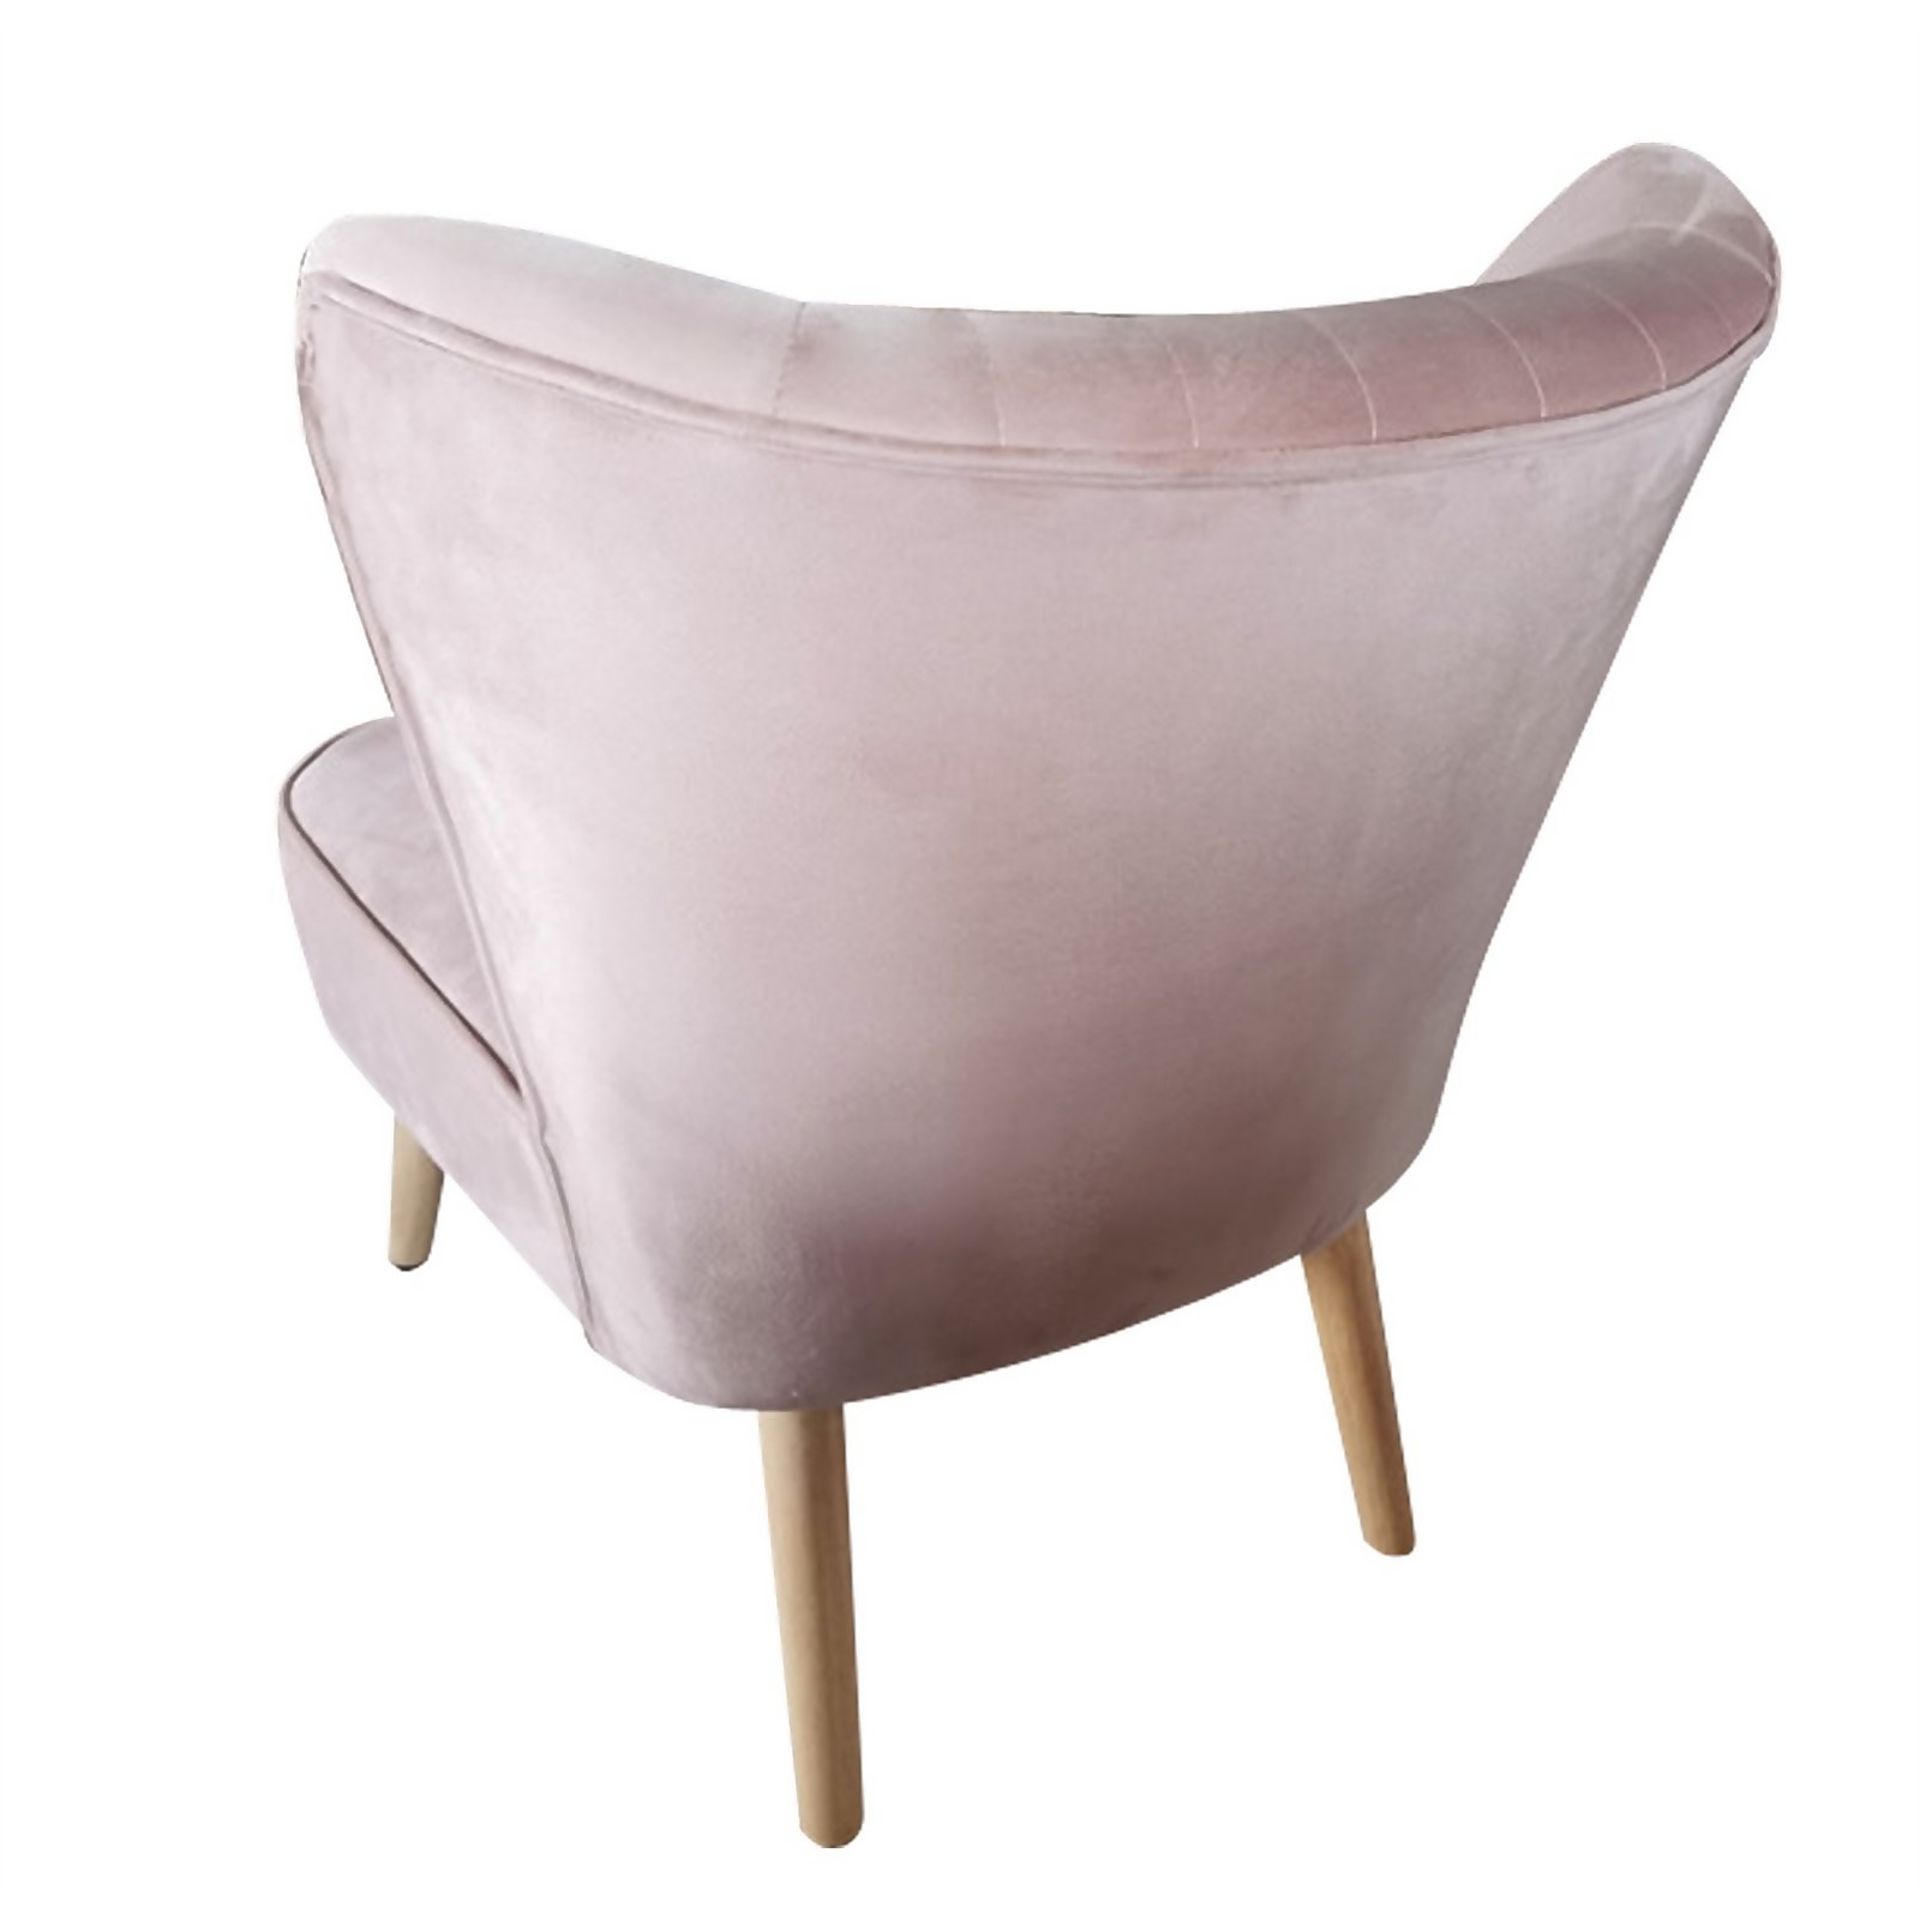 (R3P) 1 X Sophia Occasional Chair Blush. Velvet Fabric Cover With Metal Legs. (H77xW64xD71cm) - Image 3 of 6